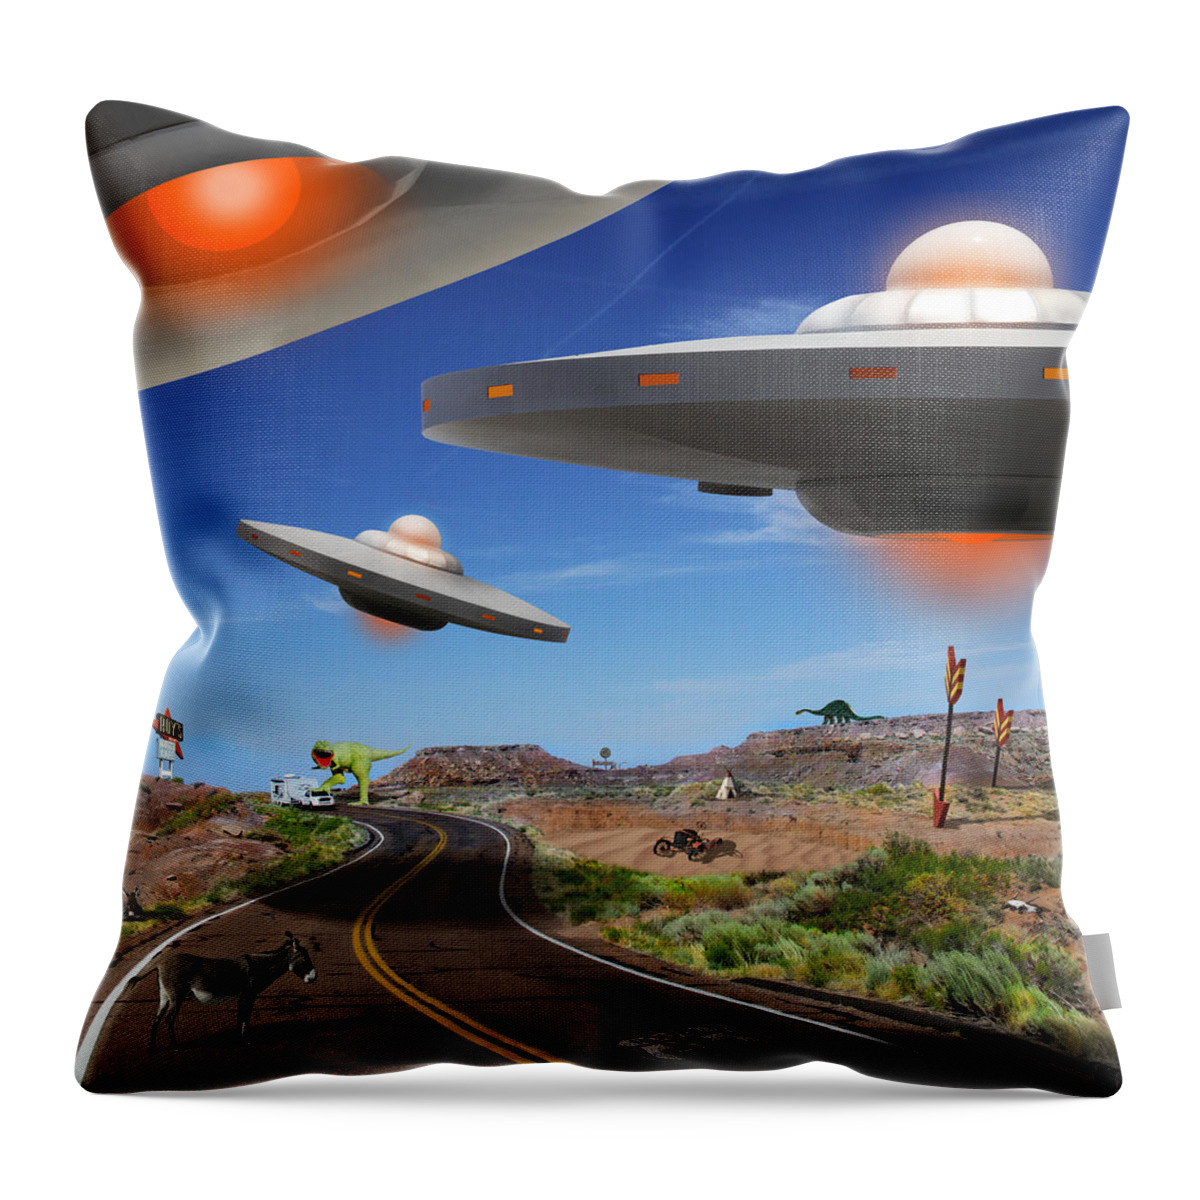 Surrealism Throw Pillow featuring the photograph You Never Know What You will See On Route 66 2 by Mike McGlothlen